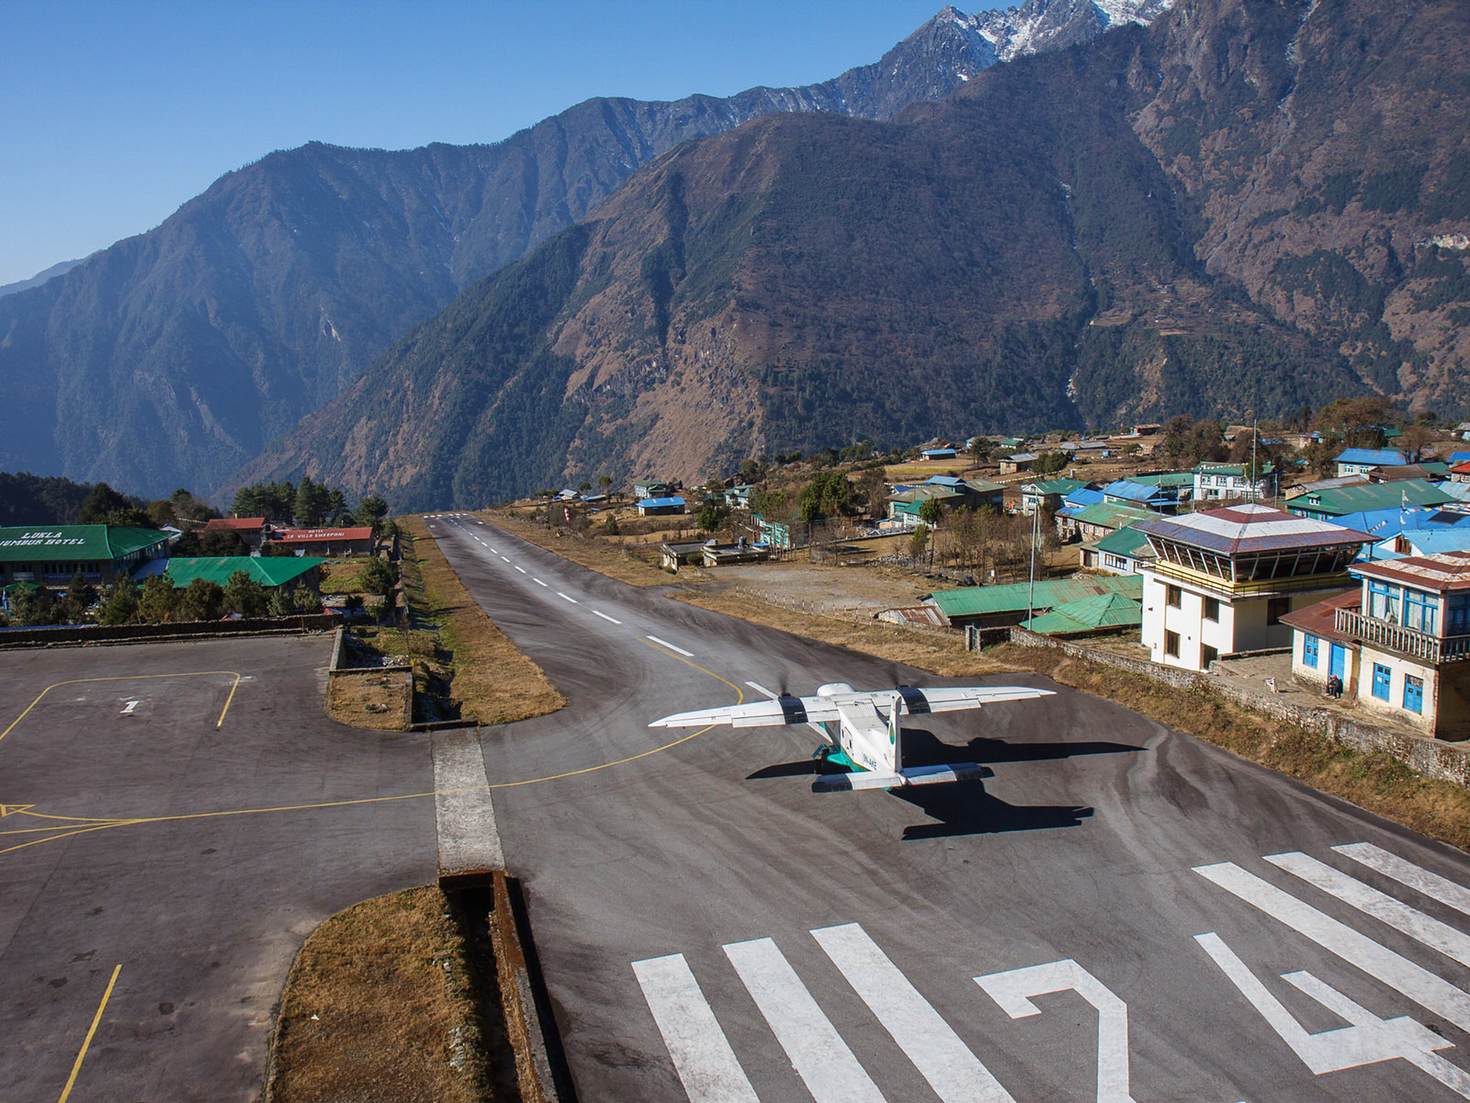 Departing from Lukla's miniature airport Â© Indrik myneur / CC by 2.0